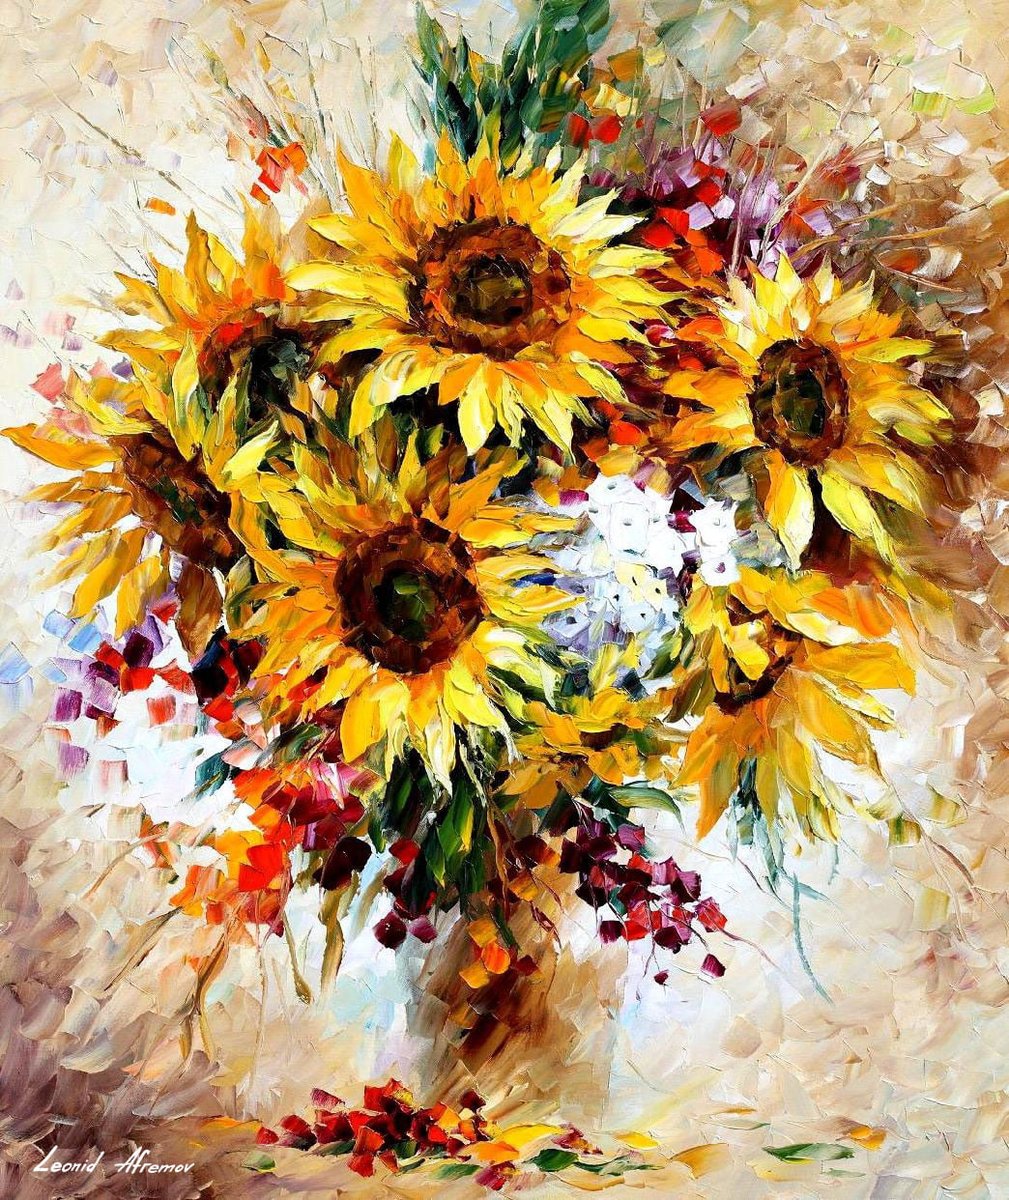 HAPPY SUNFLOWERS - Large-Size Original Oil Painting ON CANVAS by Leonid Afremov (not mixed-media, print, or recreation artwork). 100% unique hand-painted painting. Today's price is $99 including shipping. COA provided afremov.com/happy-sunflowe…